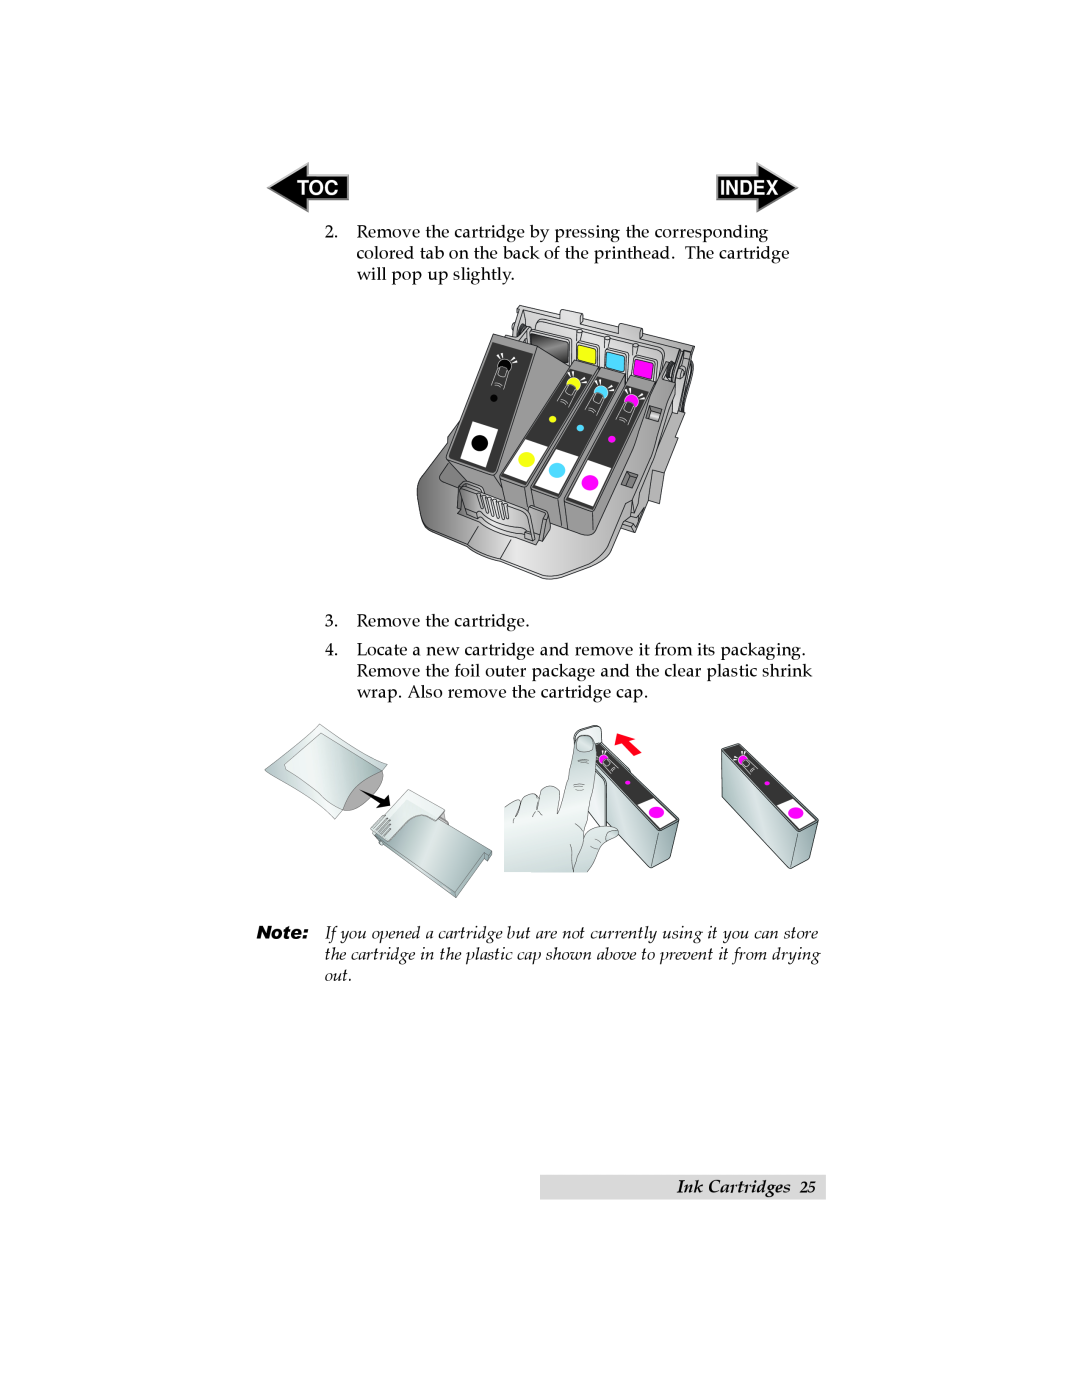 Primera Technology RX900 user manual Index, Remove the cartridge, Ink Cartridges 